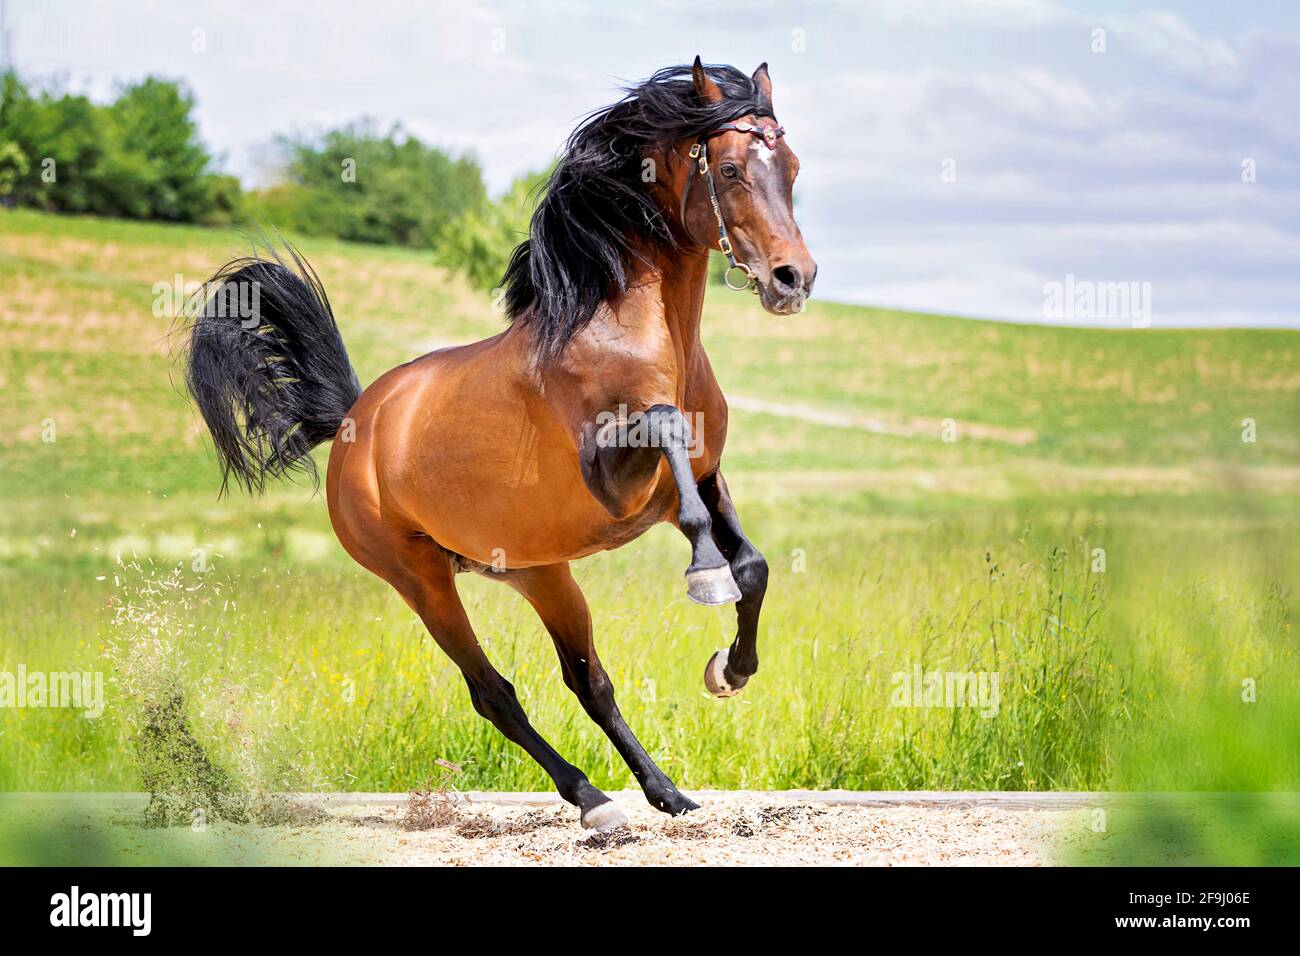 PRE Andalusian x Arabian Horse. Bay stallion galloping on a riding place. Germany Stock Photo